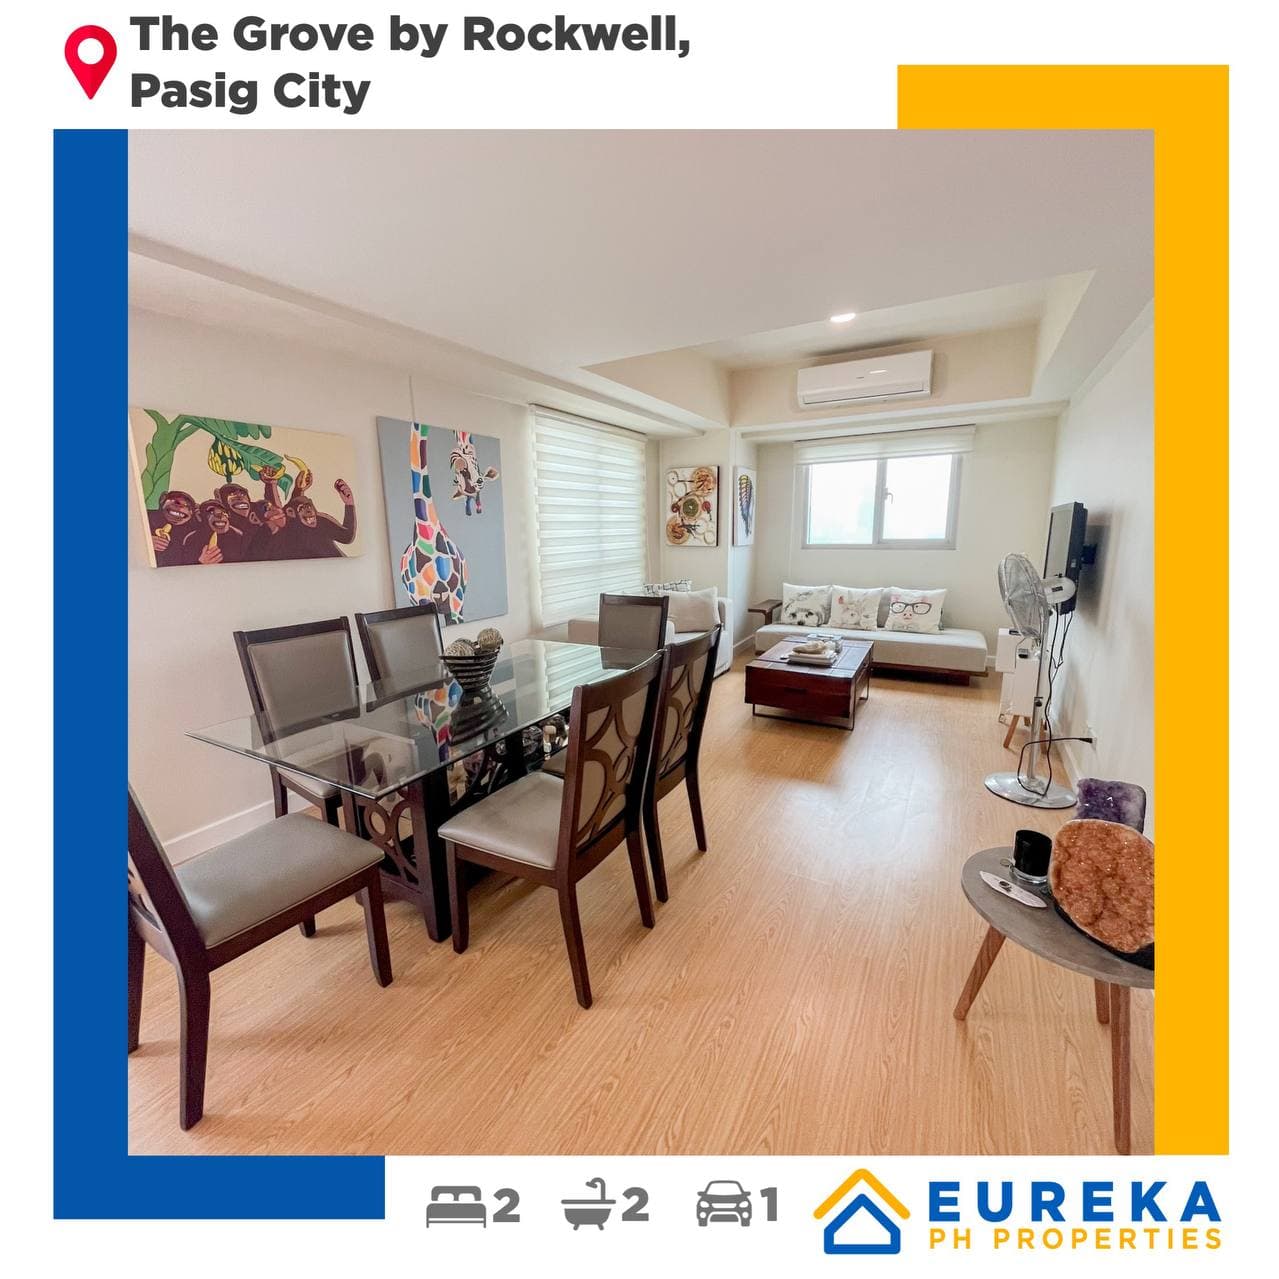 Fully furnished 2BR  106sqm w/ 2 parking  slots at the Grove by Rockwell, Pasig City.